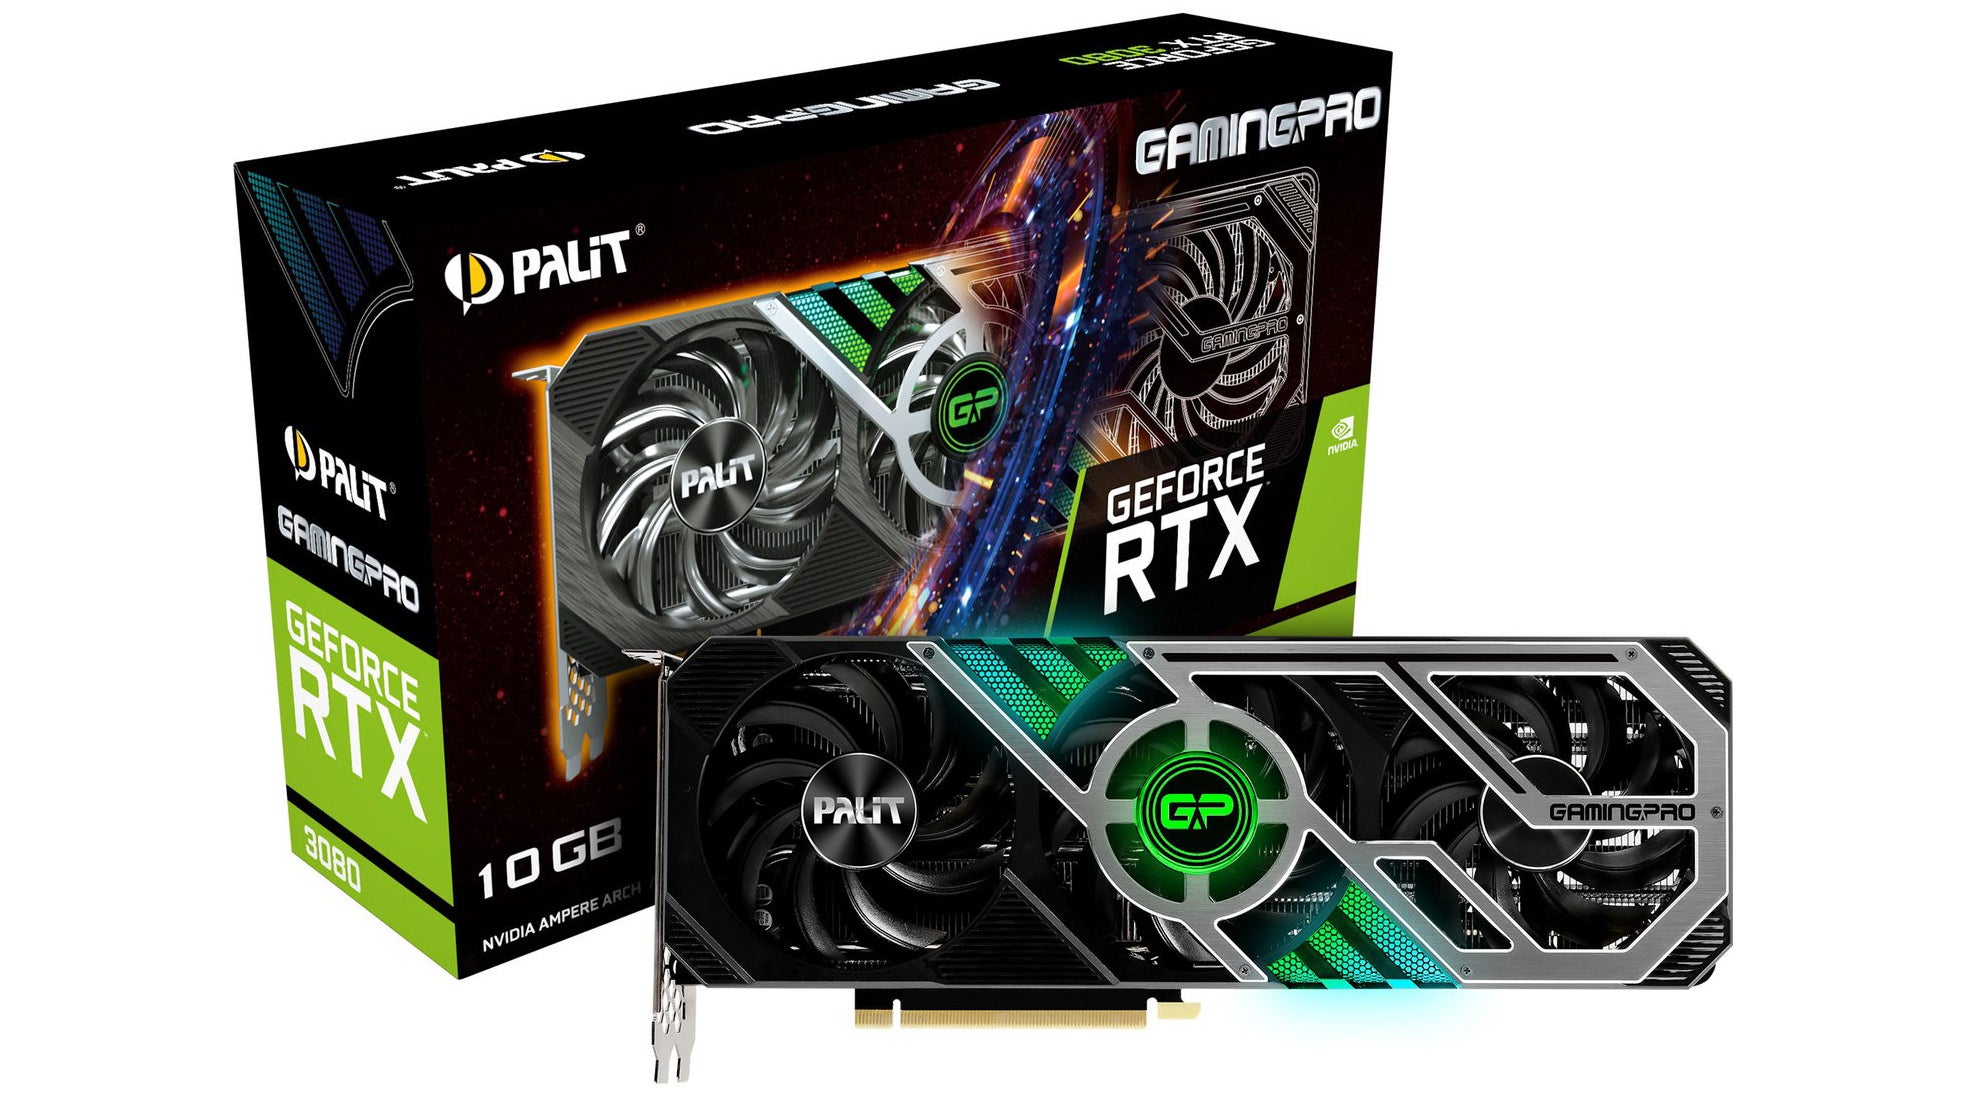 a photo of a Palit RTX 3080 graphics card